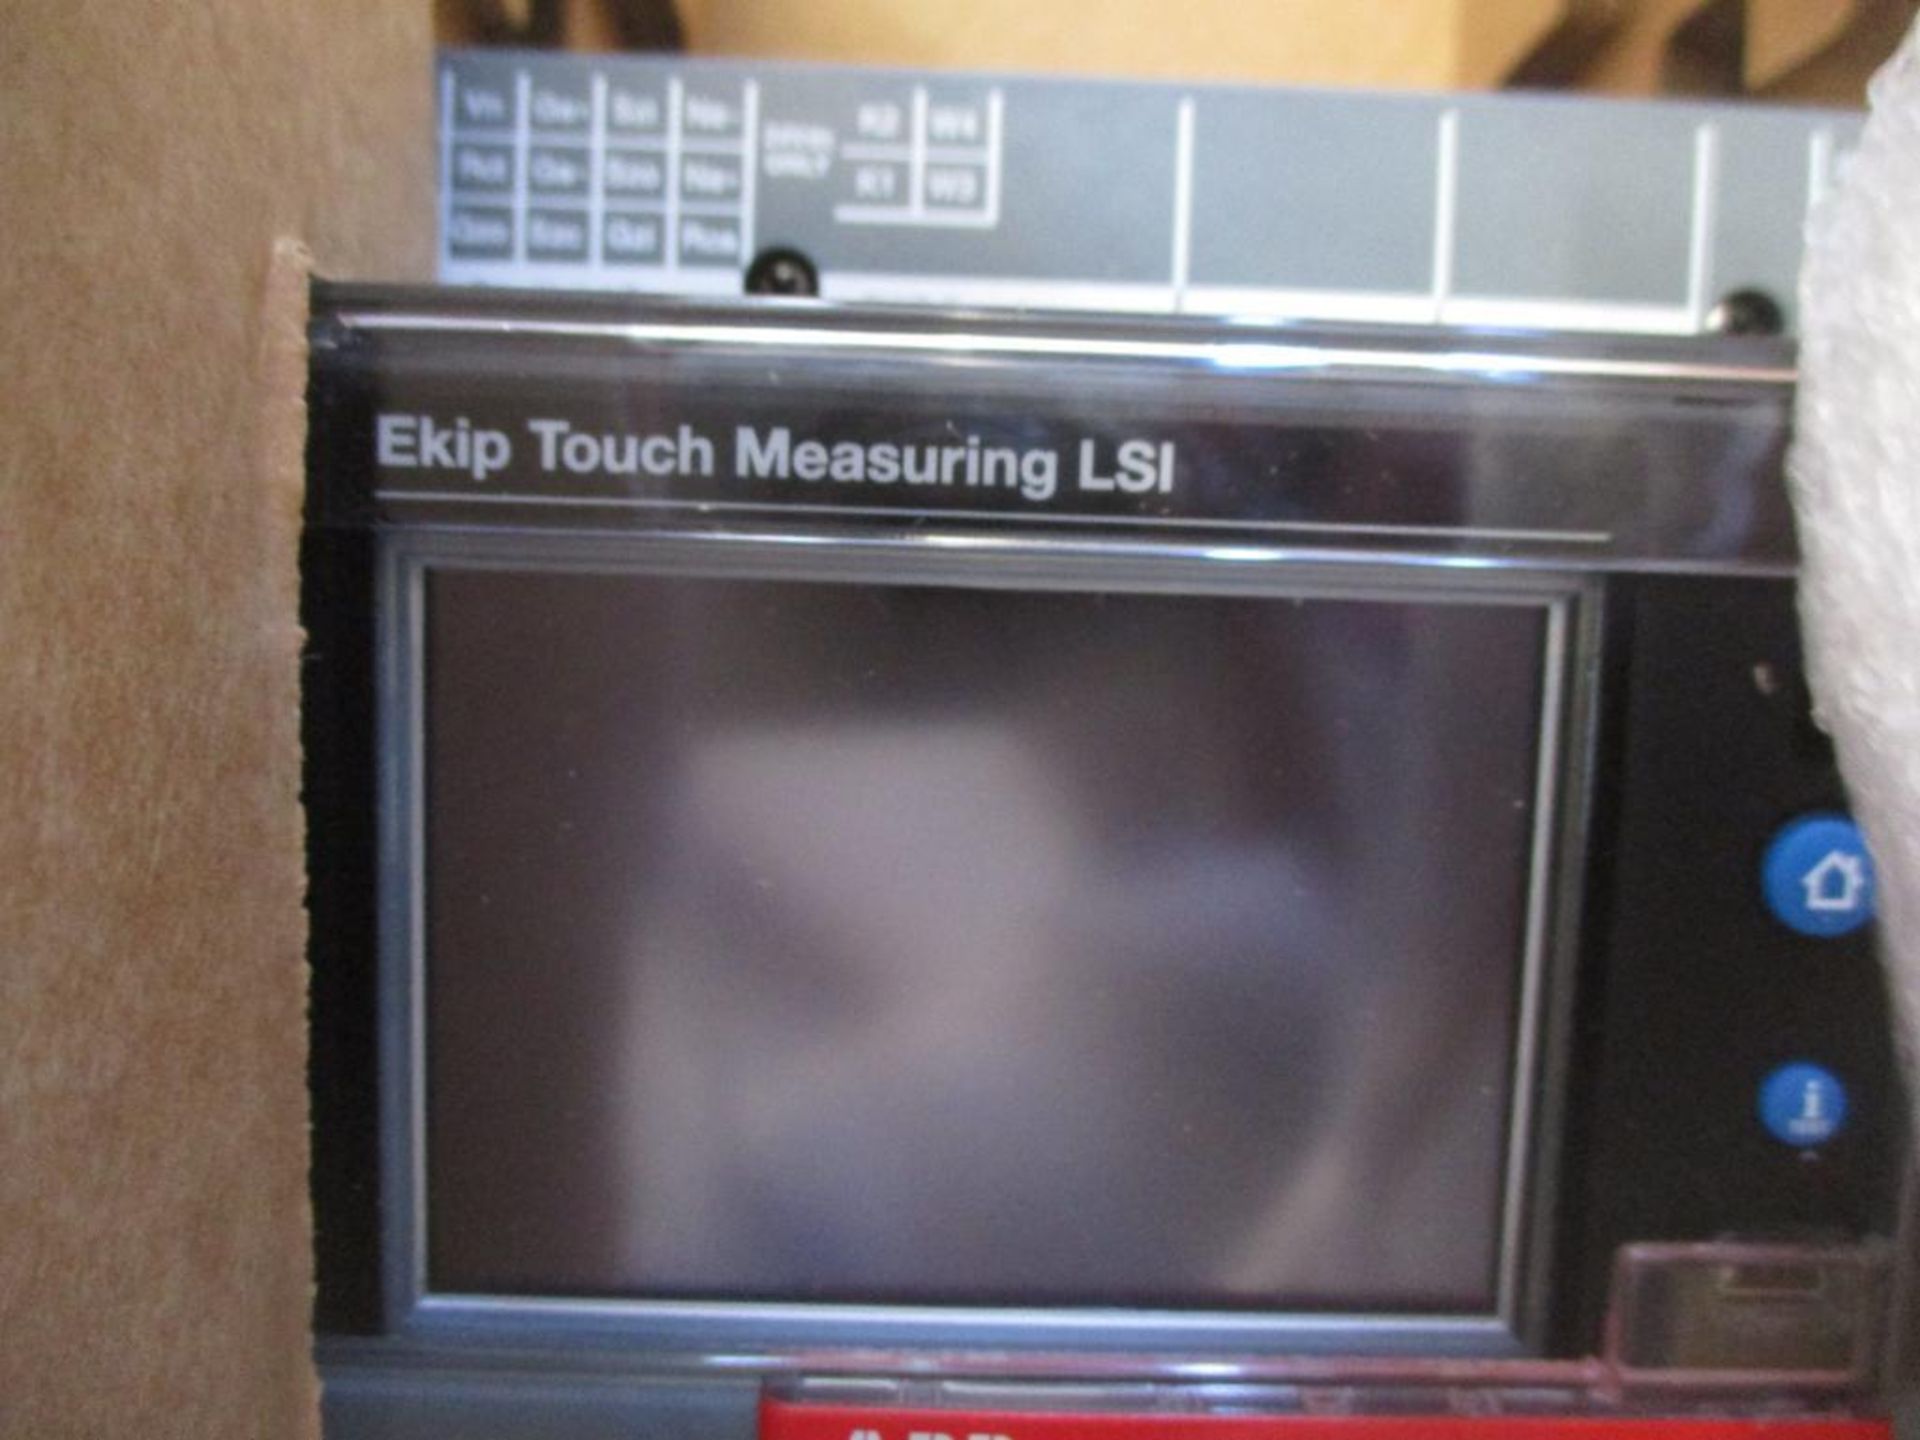 ABB 800 AMP Circuit Breaker, SACE TMAX XT7 H 800, EKIP Touch Measuring LSI 3-Pole (New in Box) - Image 3 of 4